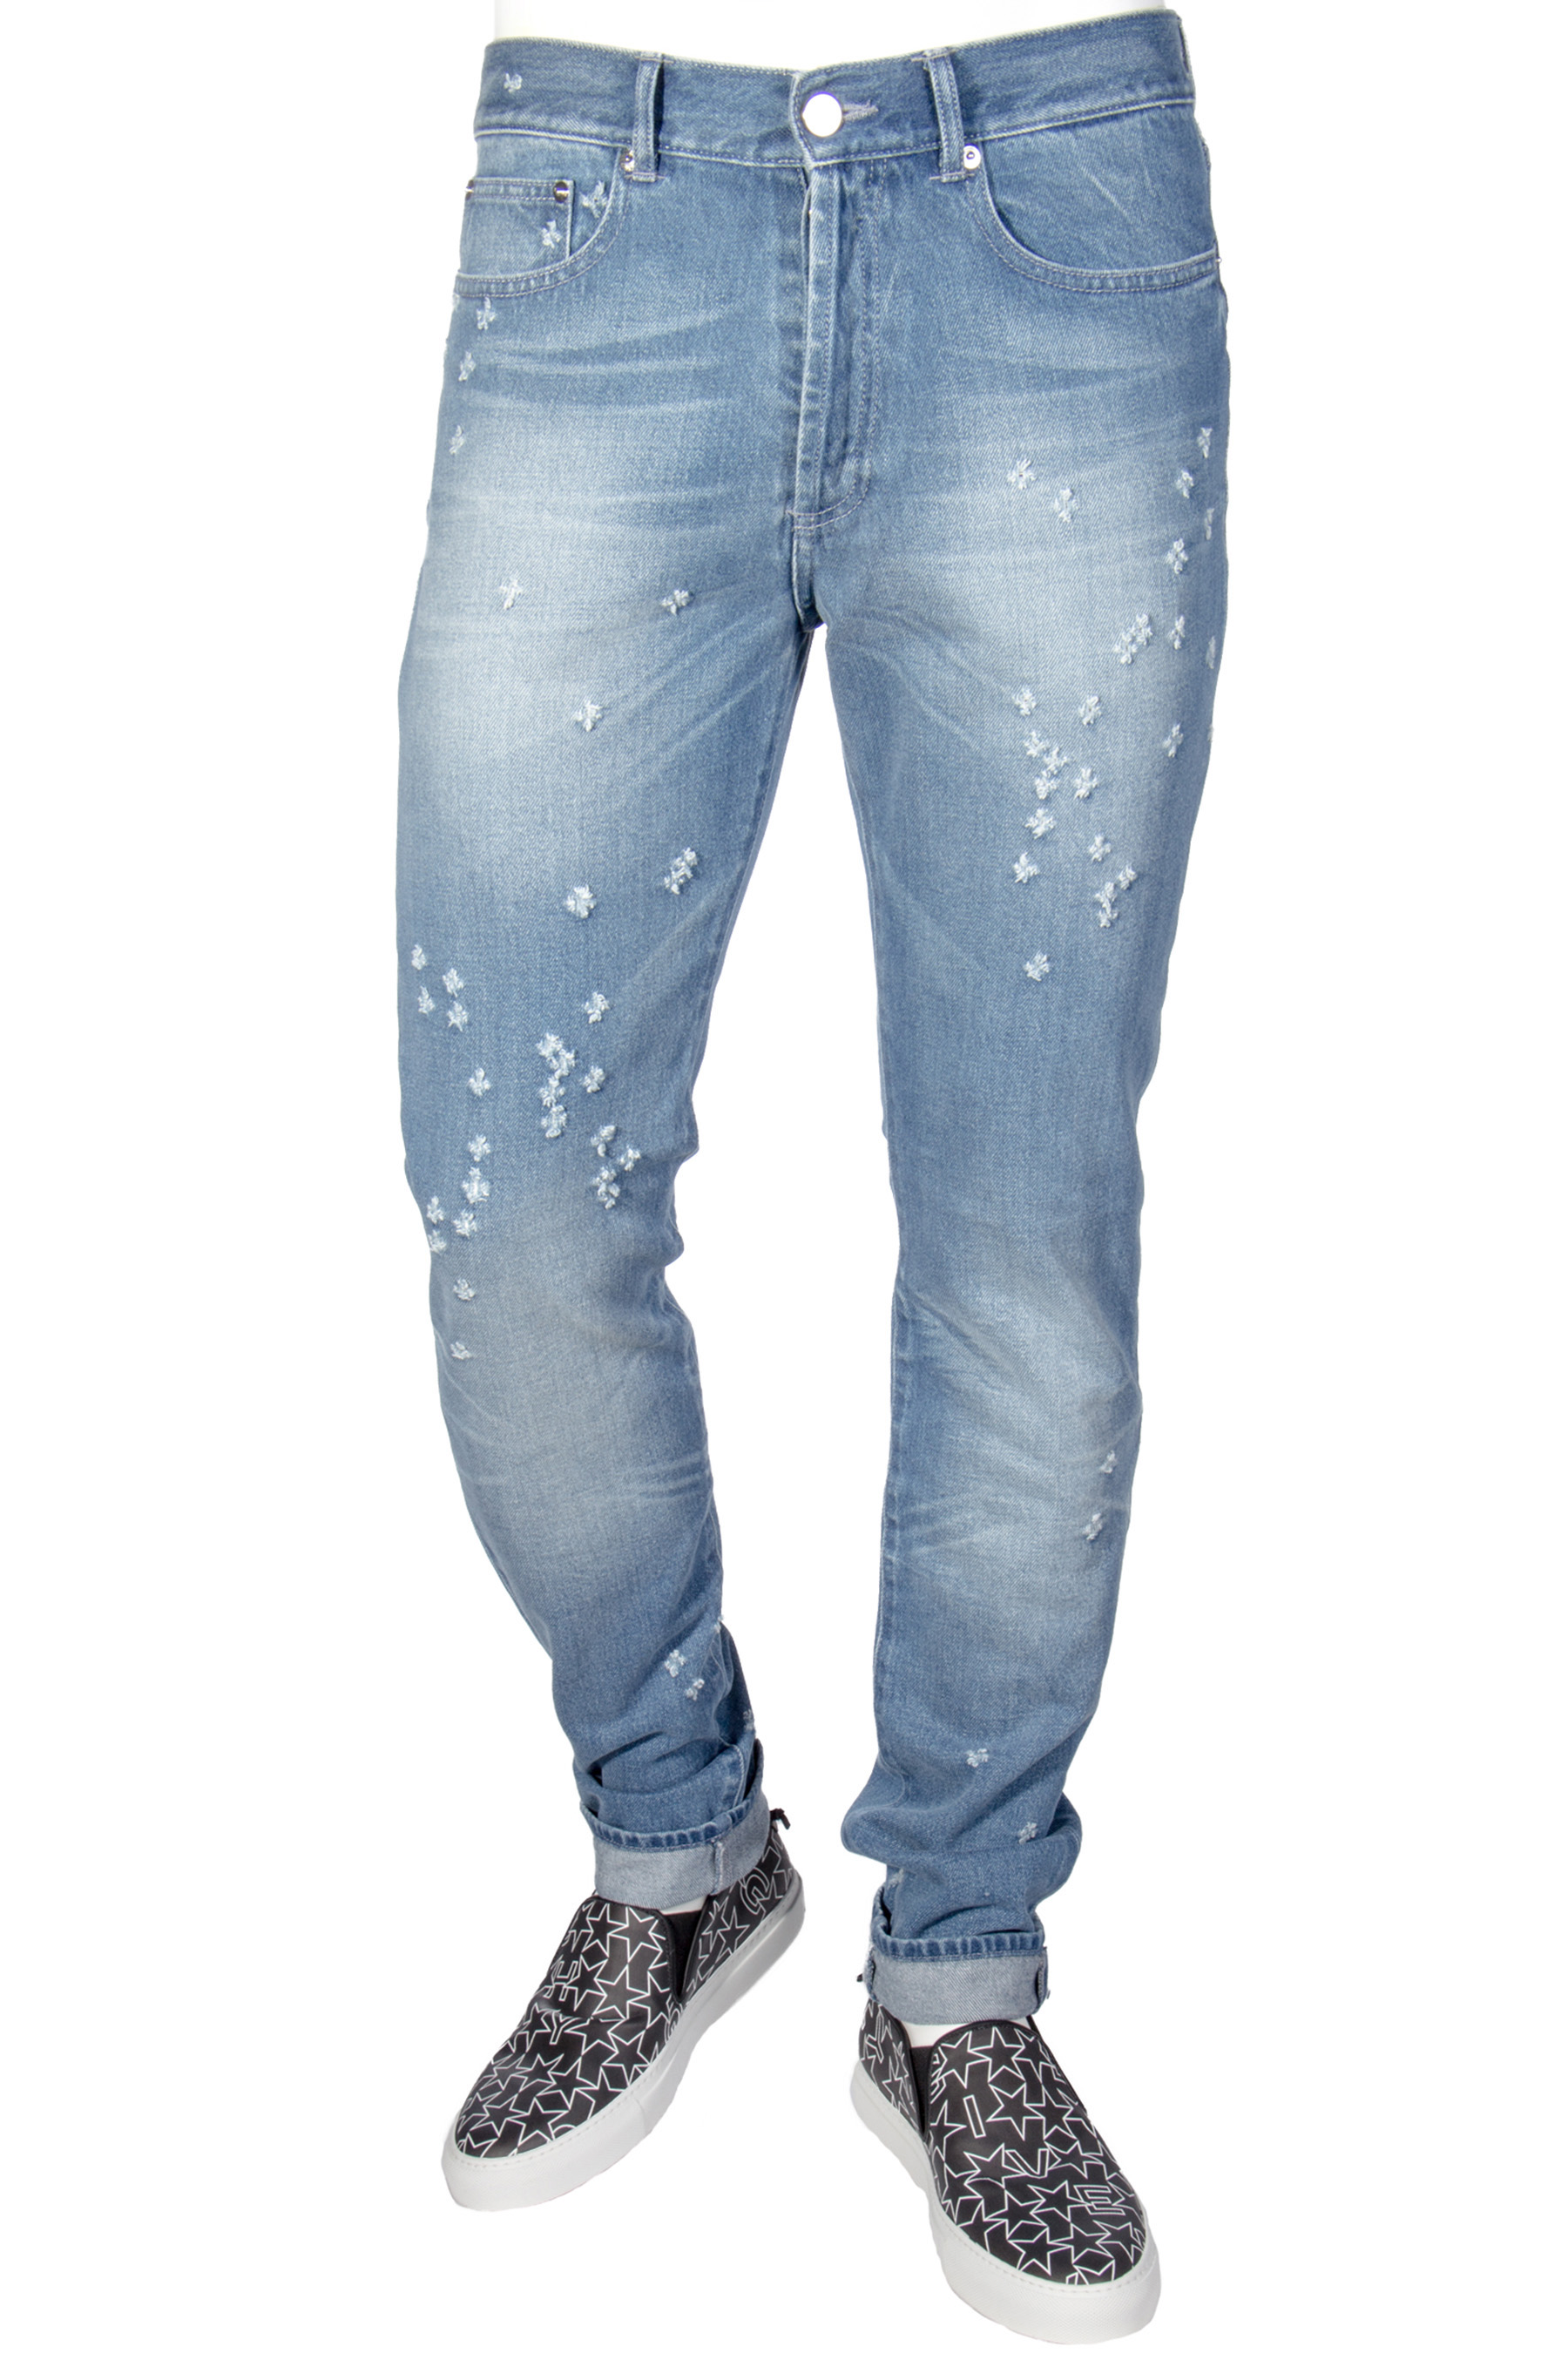 givenchy jeans mens